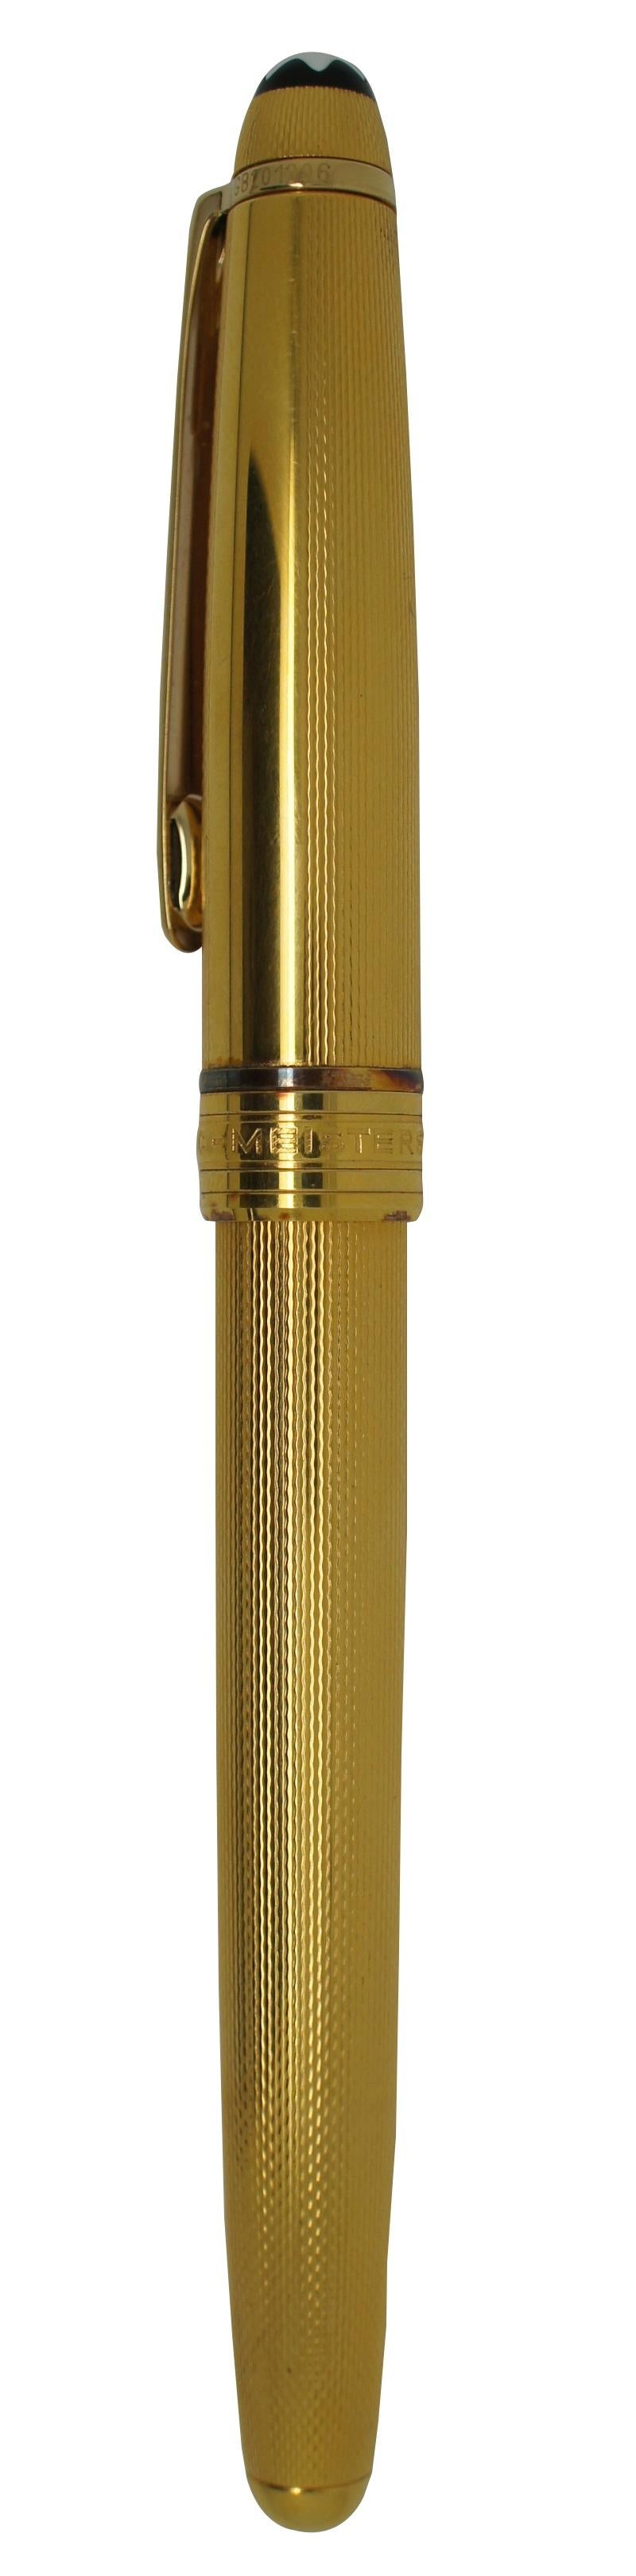 Vintage Montblanc Meisterstuck Solitaire Barley cartridge filled fountain pen with 4810 14K Gold 585. Serial number GB201206. Made in Germany. Two partial packages of Black & Royal Blue ink cartridges included.
 